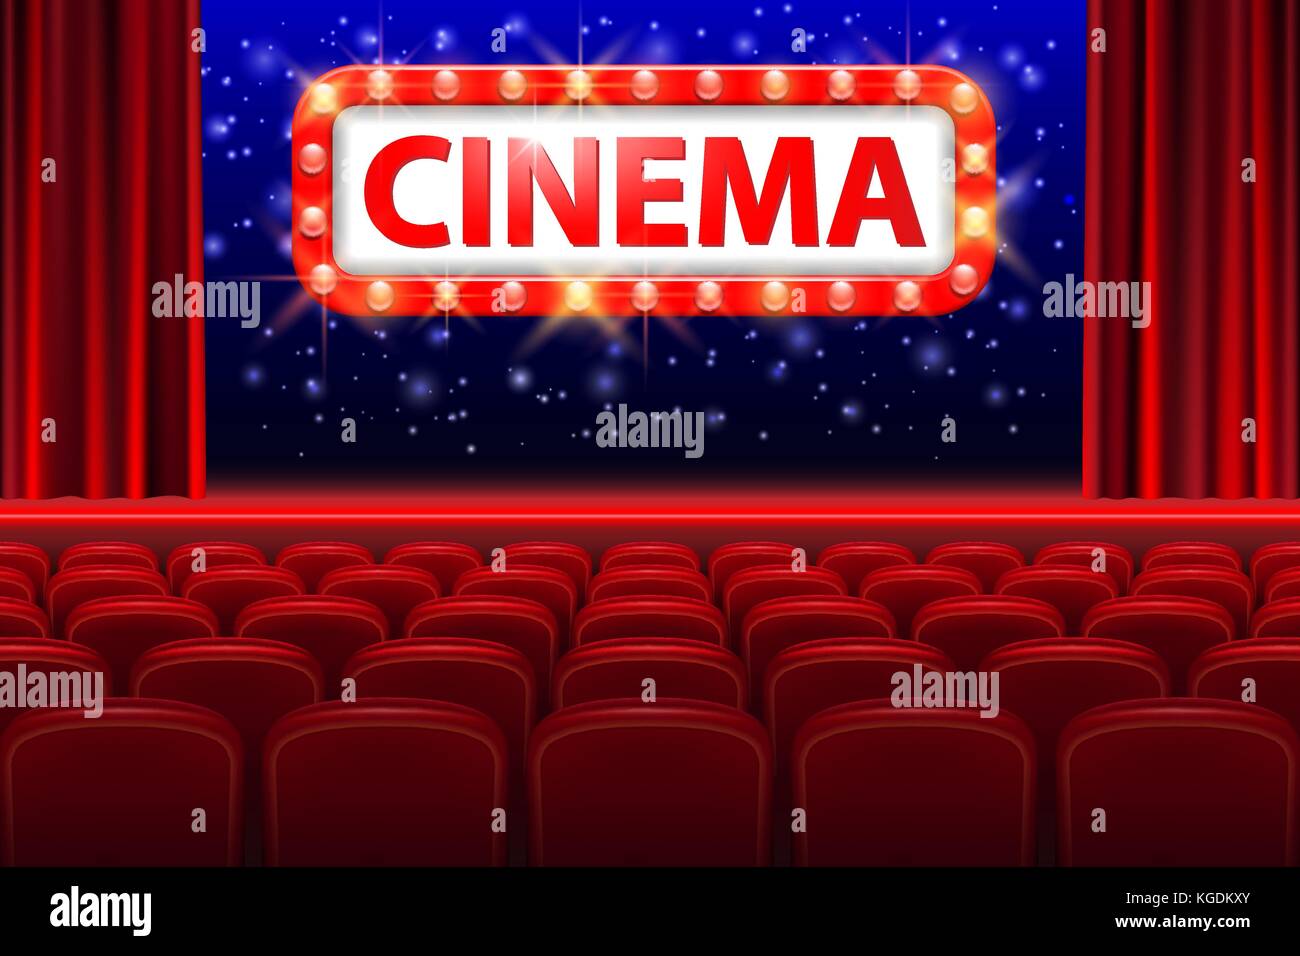 Realistic cinema hall interior with red seats. Retro style cinema sign with spot light frame. Movie premiere poster design. Vector illustration. Stock Vector